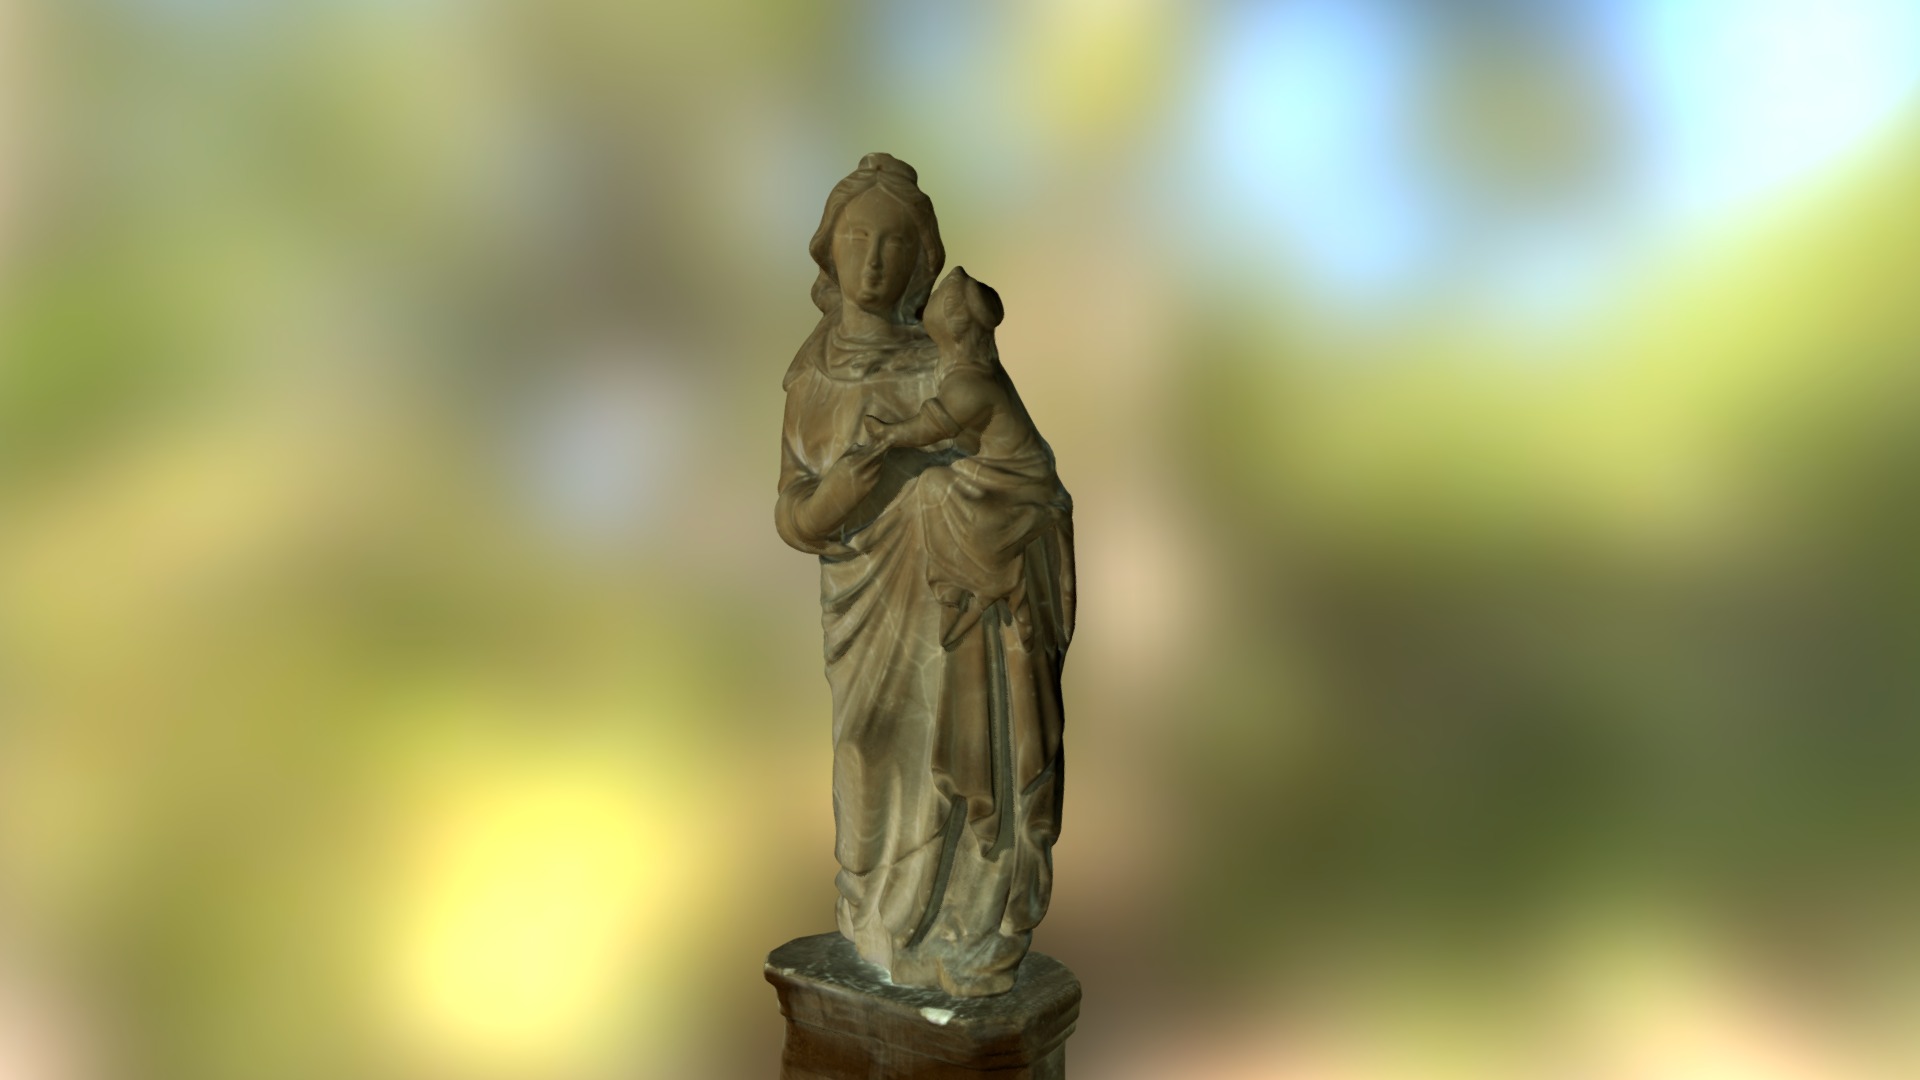 3D model Maria - This is a 3D model of the Maria. The 3D model is about a statue of a person.